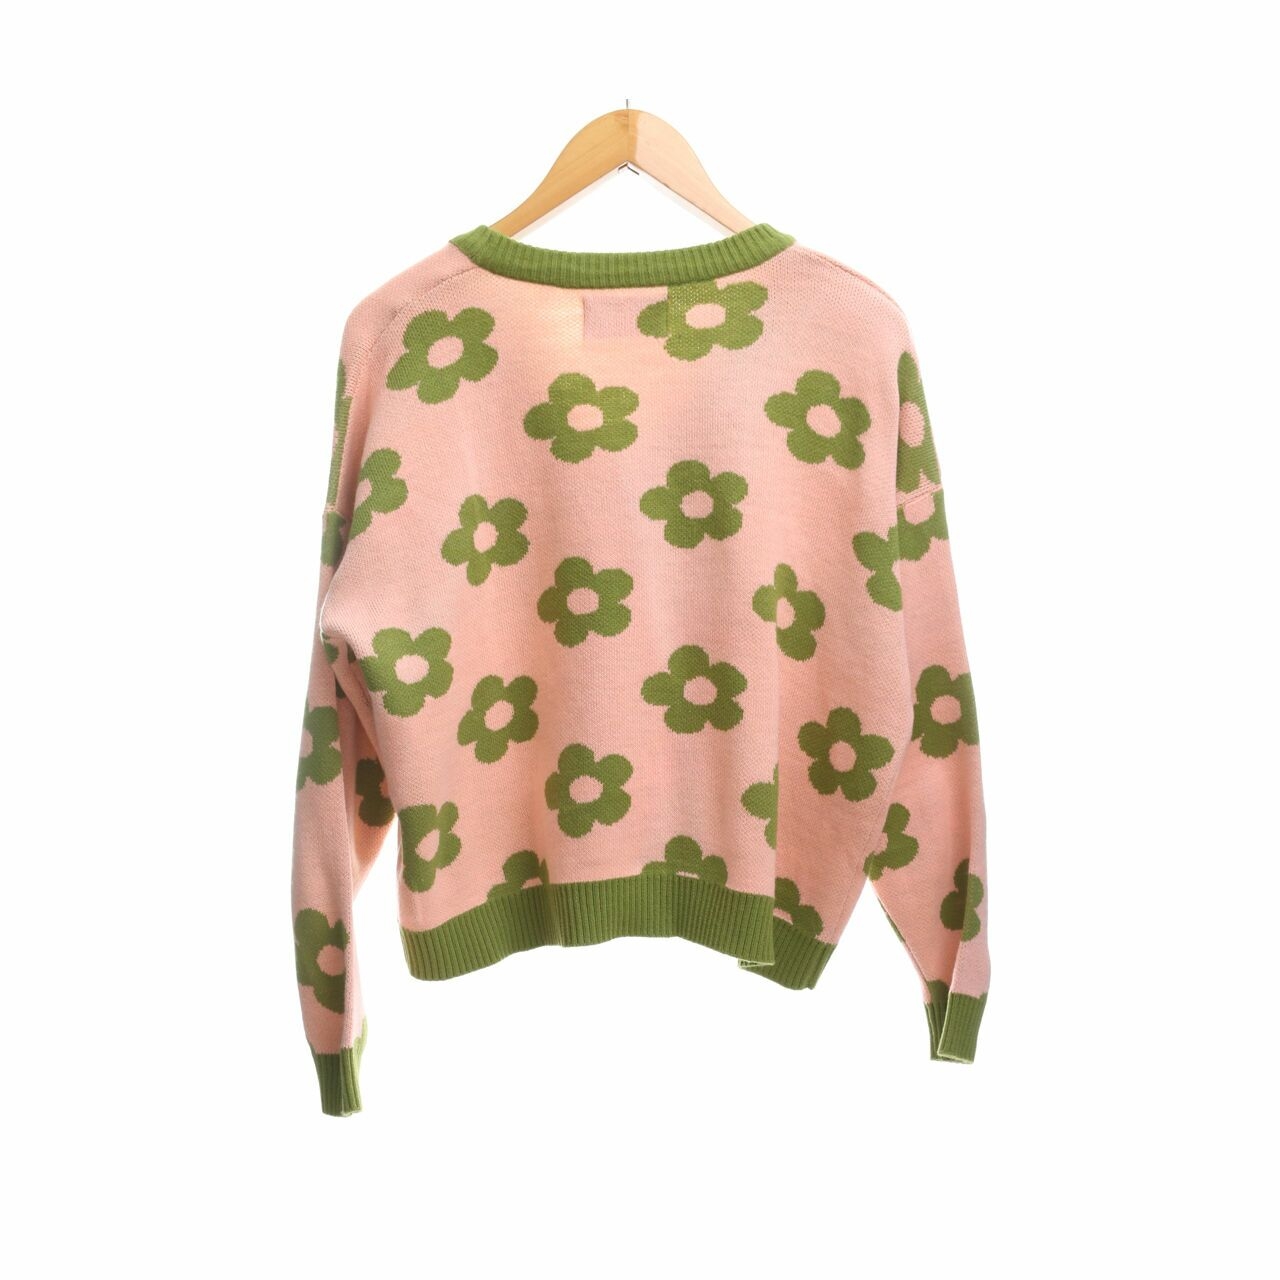 Play With Pattero Green & Pink Floral Cardigan